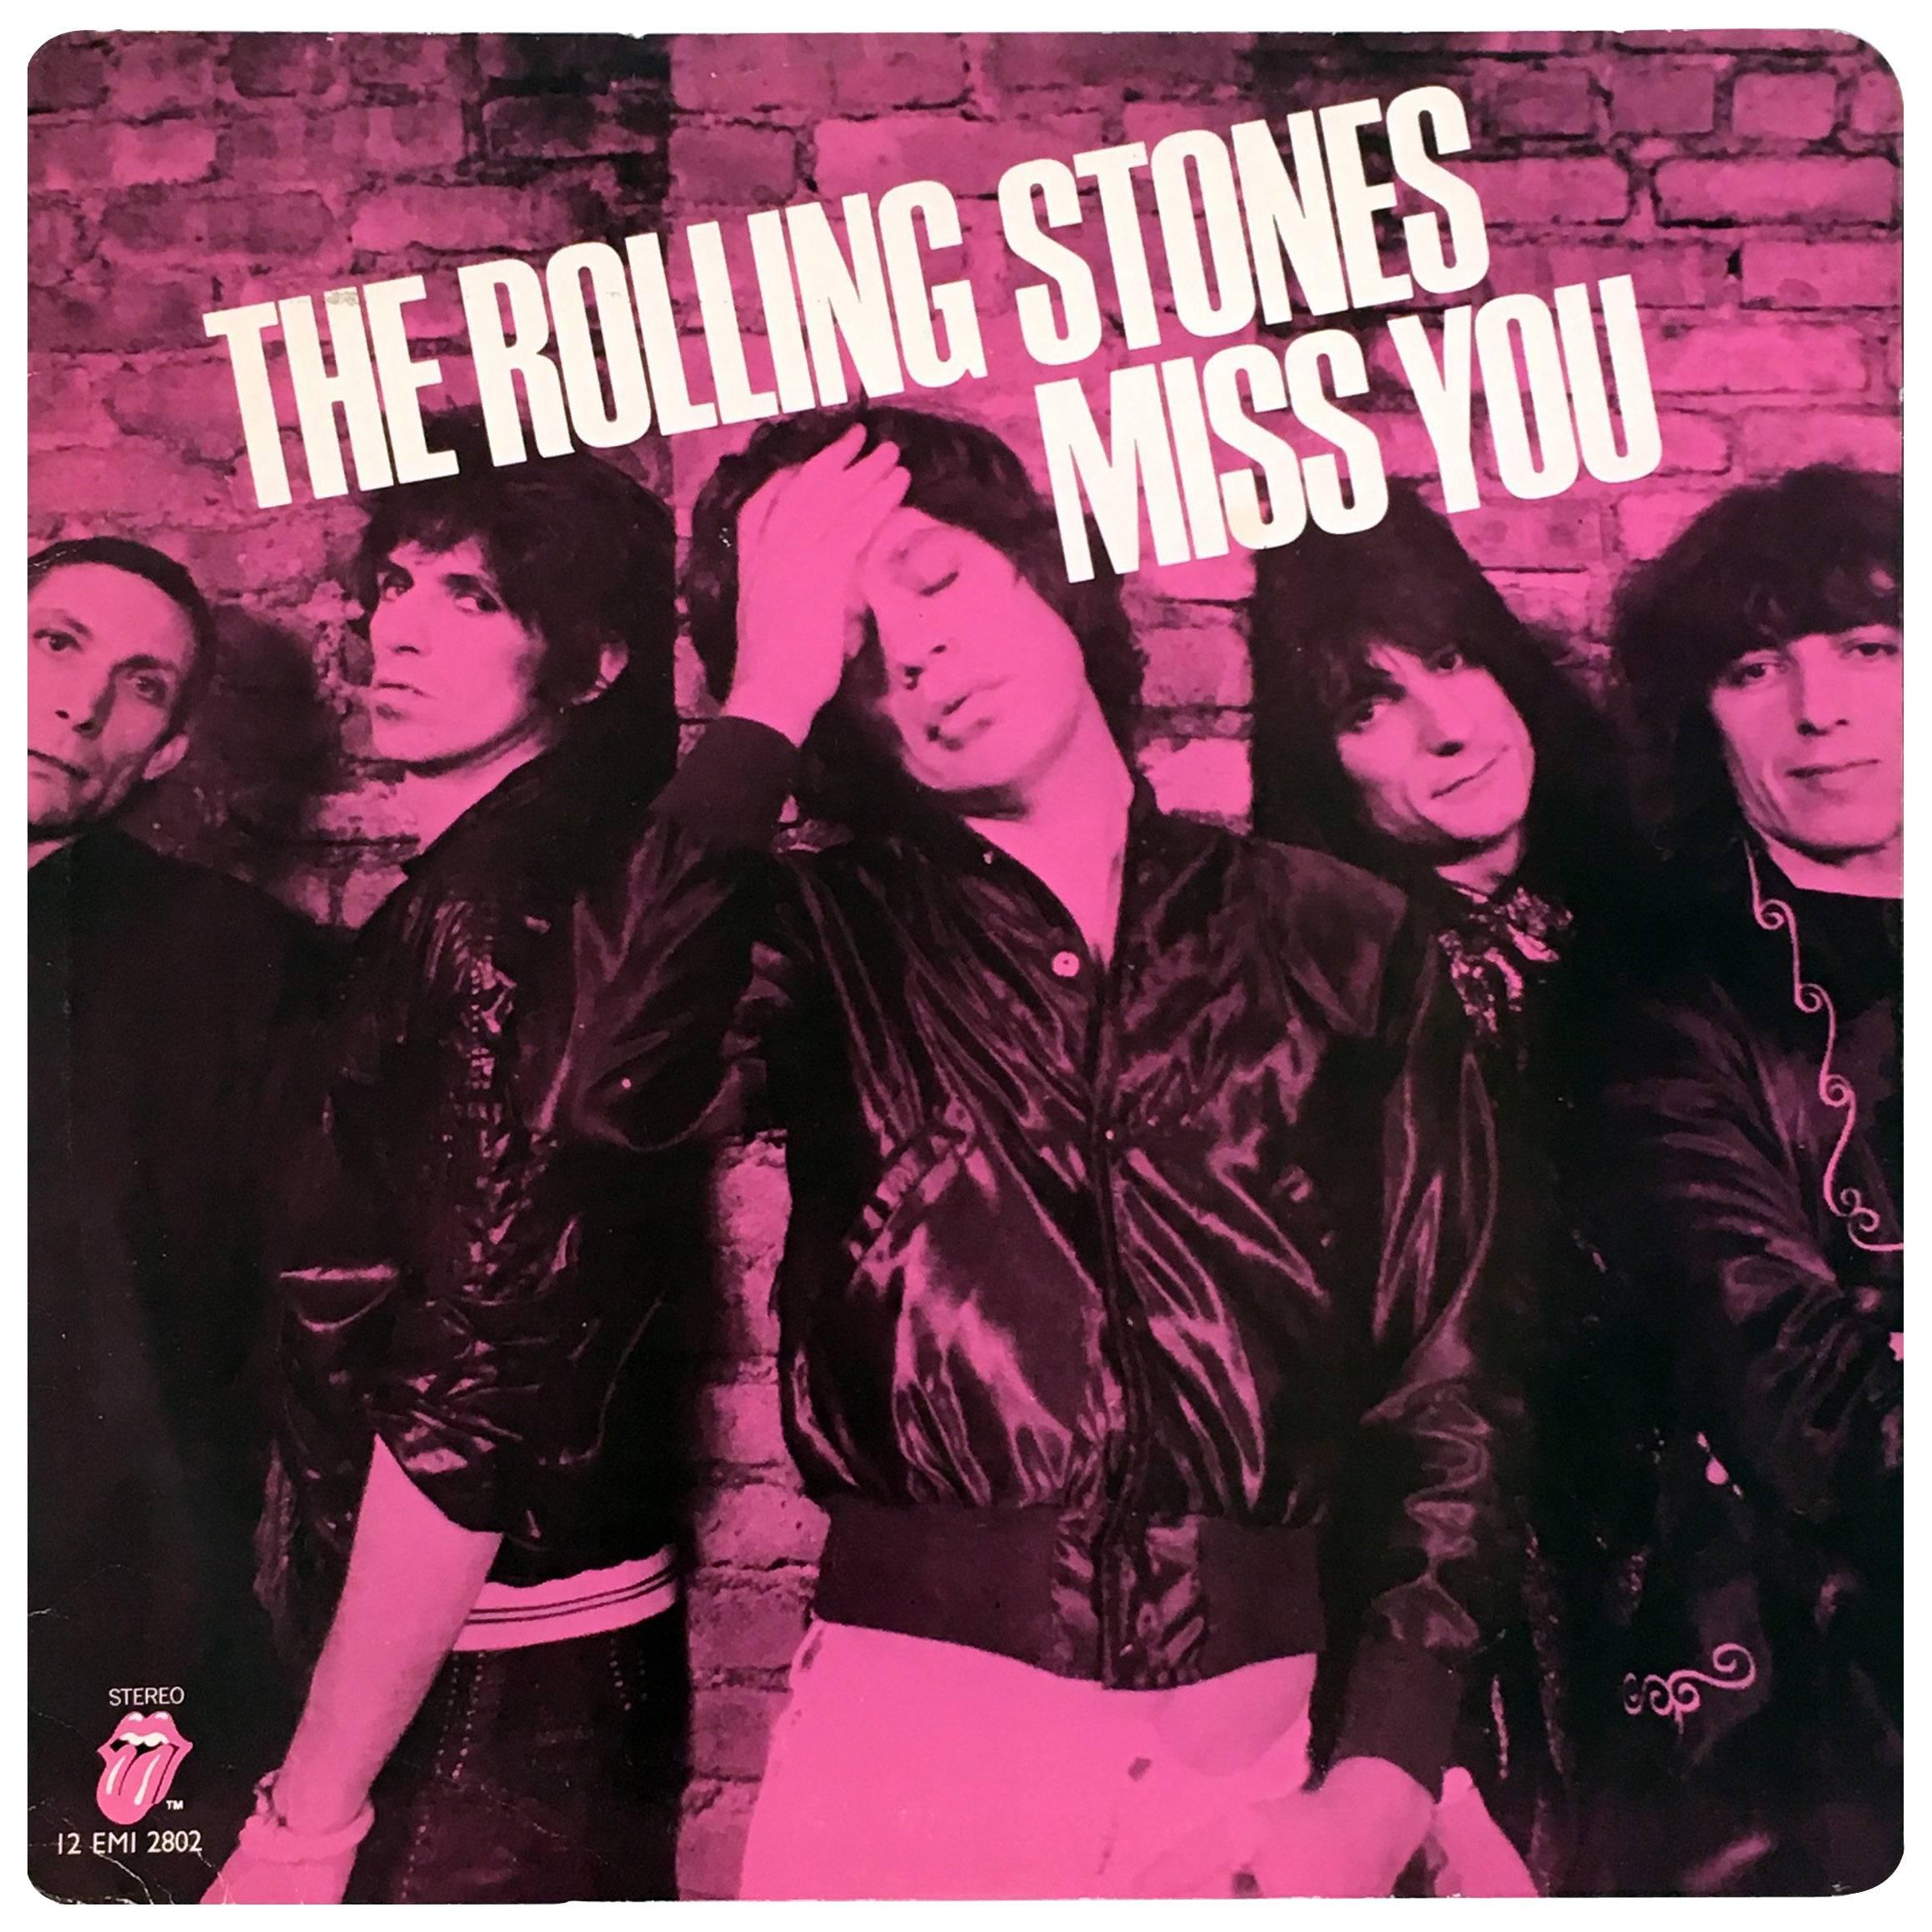 Rolling Stones Record Art 'Mick Jagger, Keith Richards'